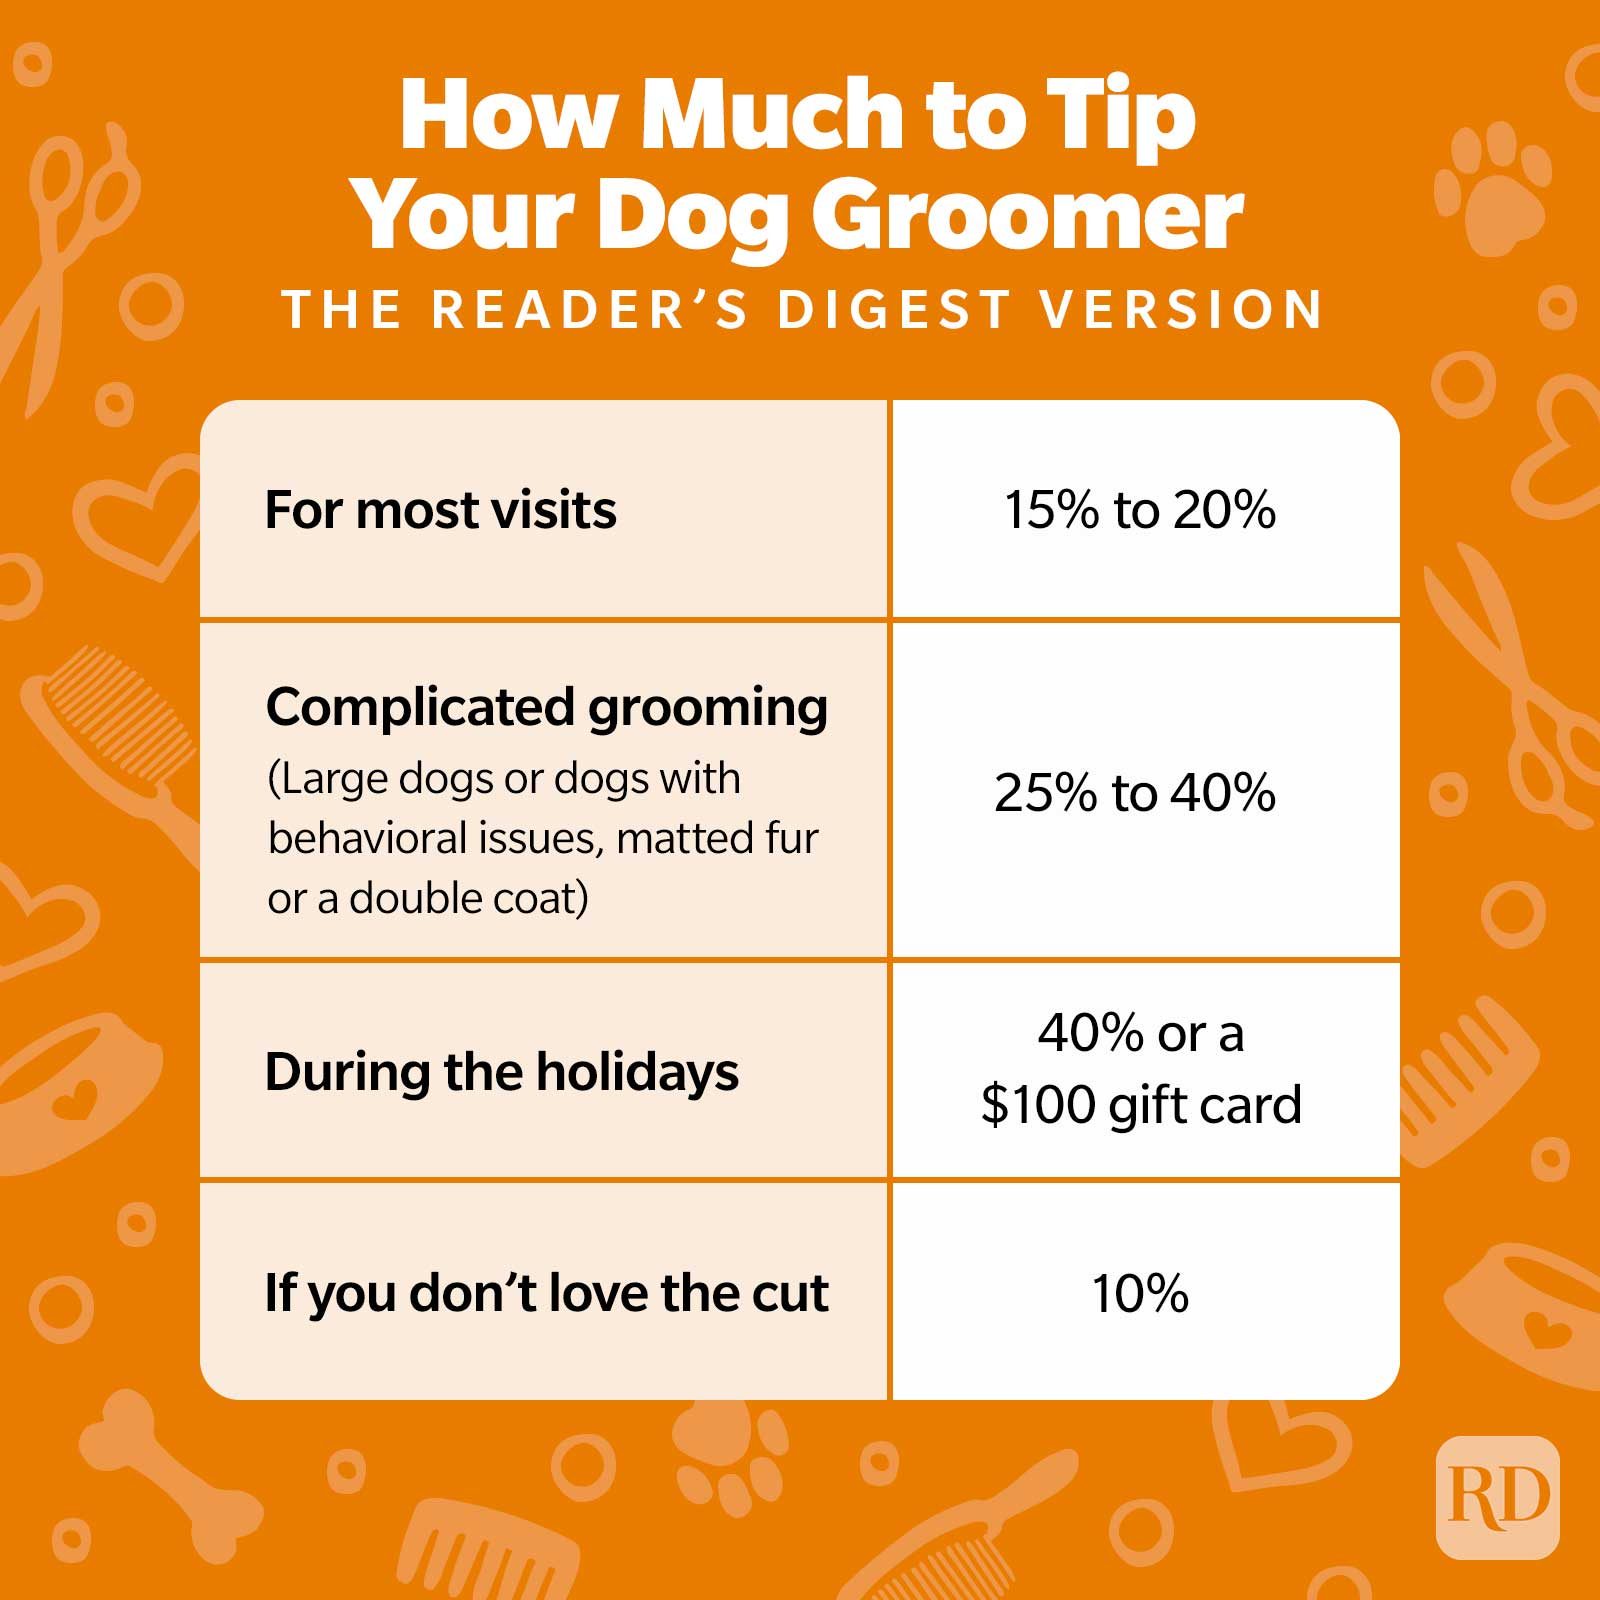 How Much To Tip Your Dog Groomer Infographic